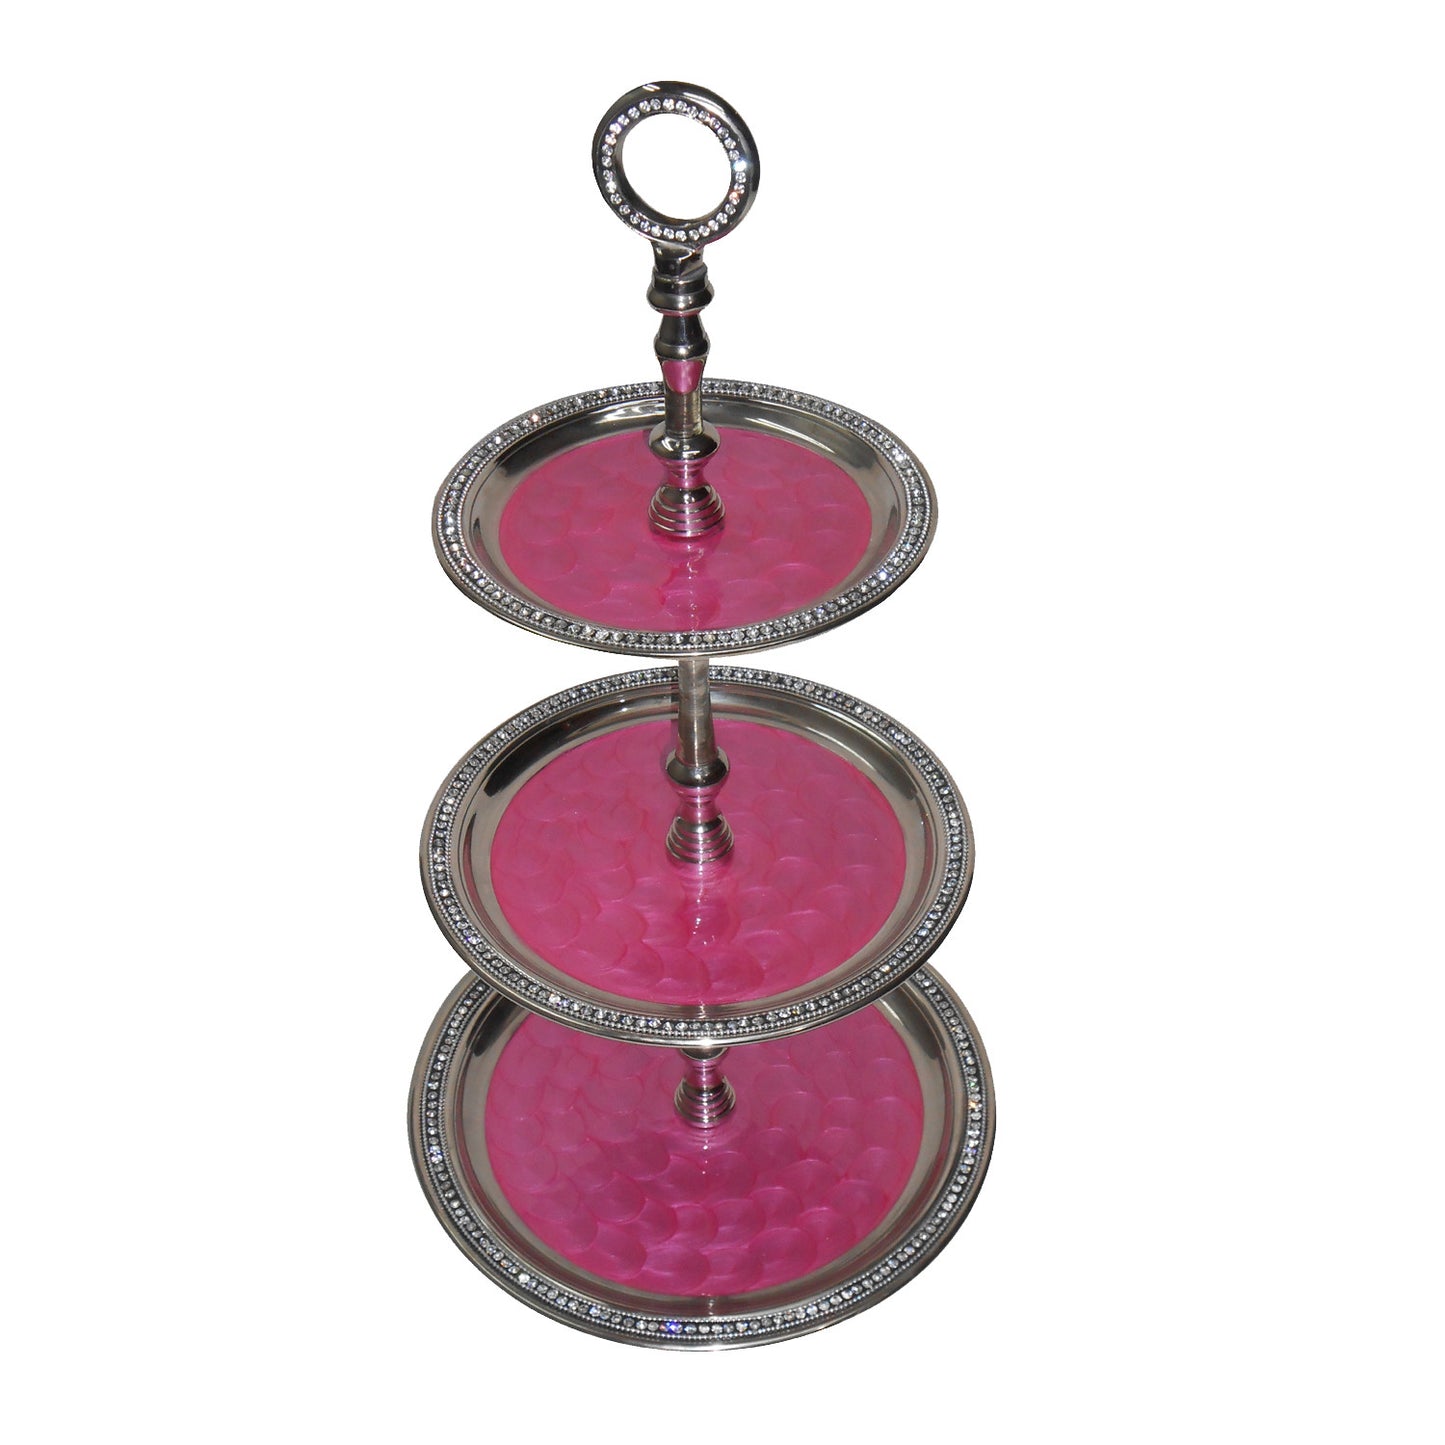 GiftBay 565 Wedding 3-Tier Cupcake Stand Round 24" High, Pink Color Enameled Trays with Clear Crystal-Studded Rim